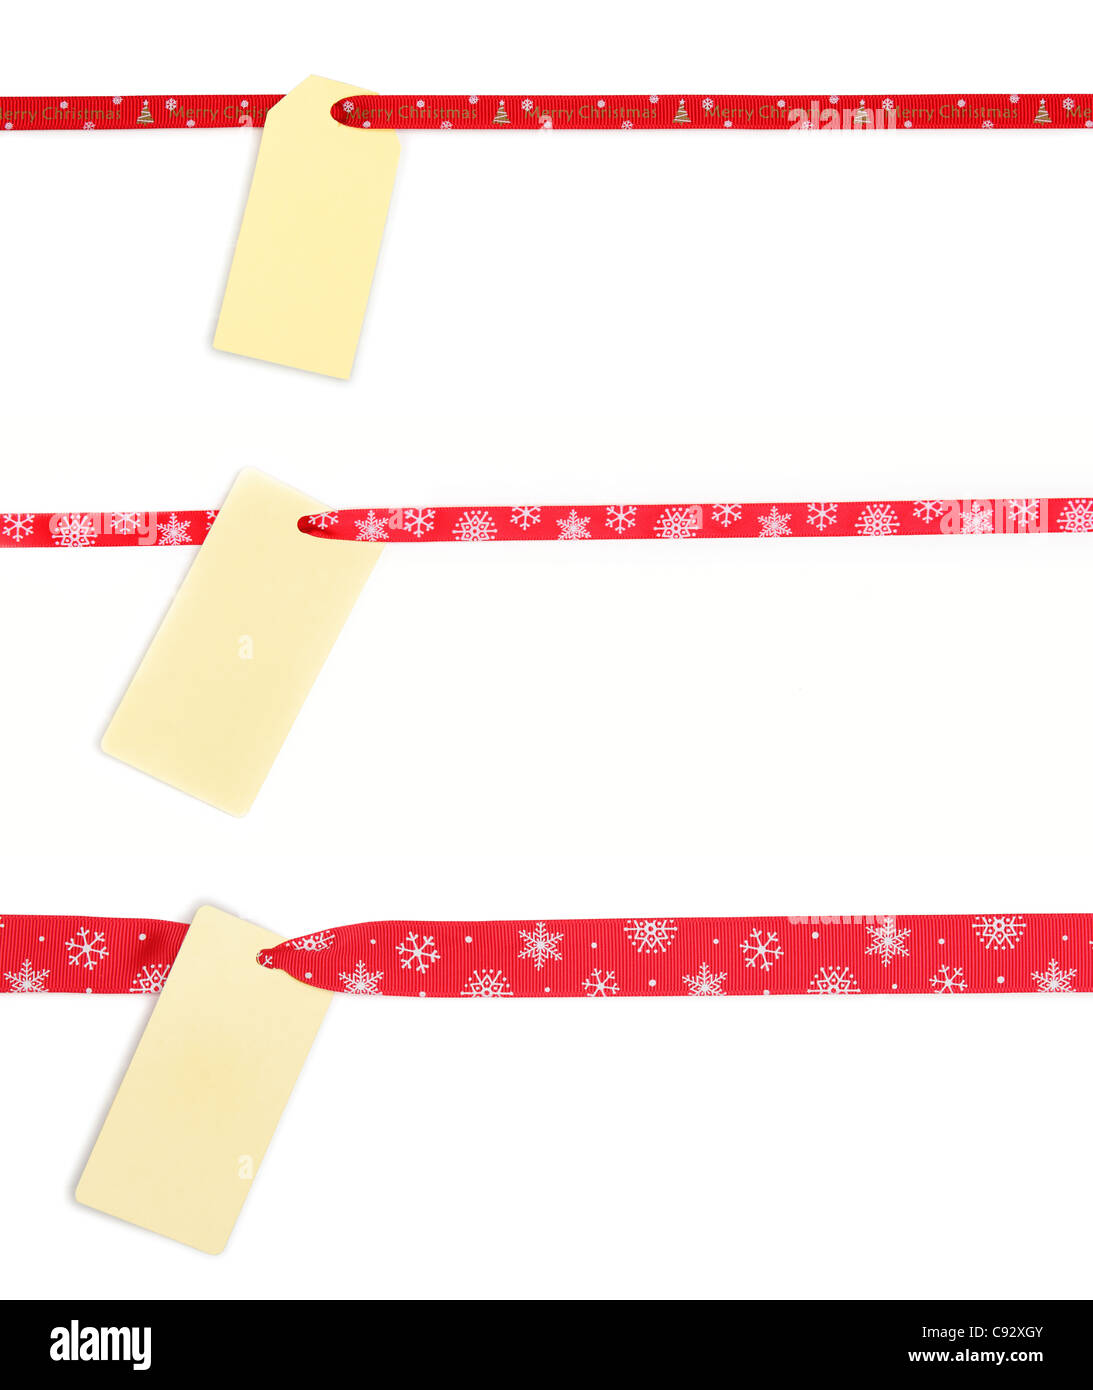 Collection of blank gift tag tied with red satin ribbon. Stock Photo